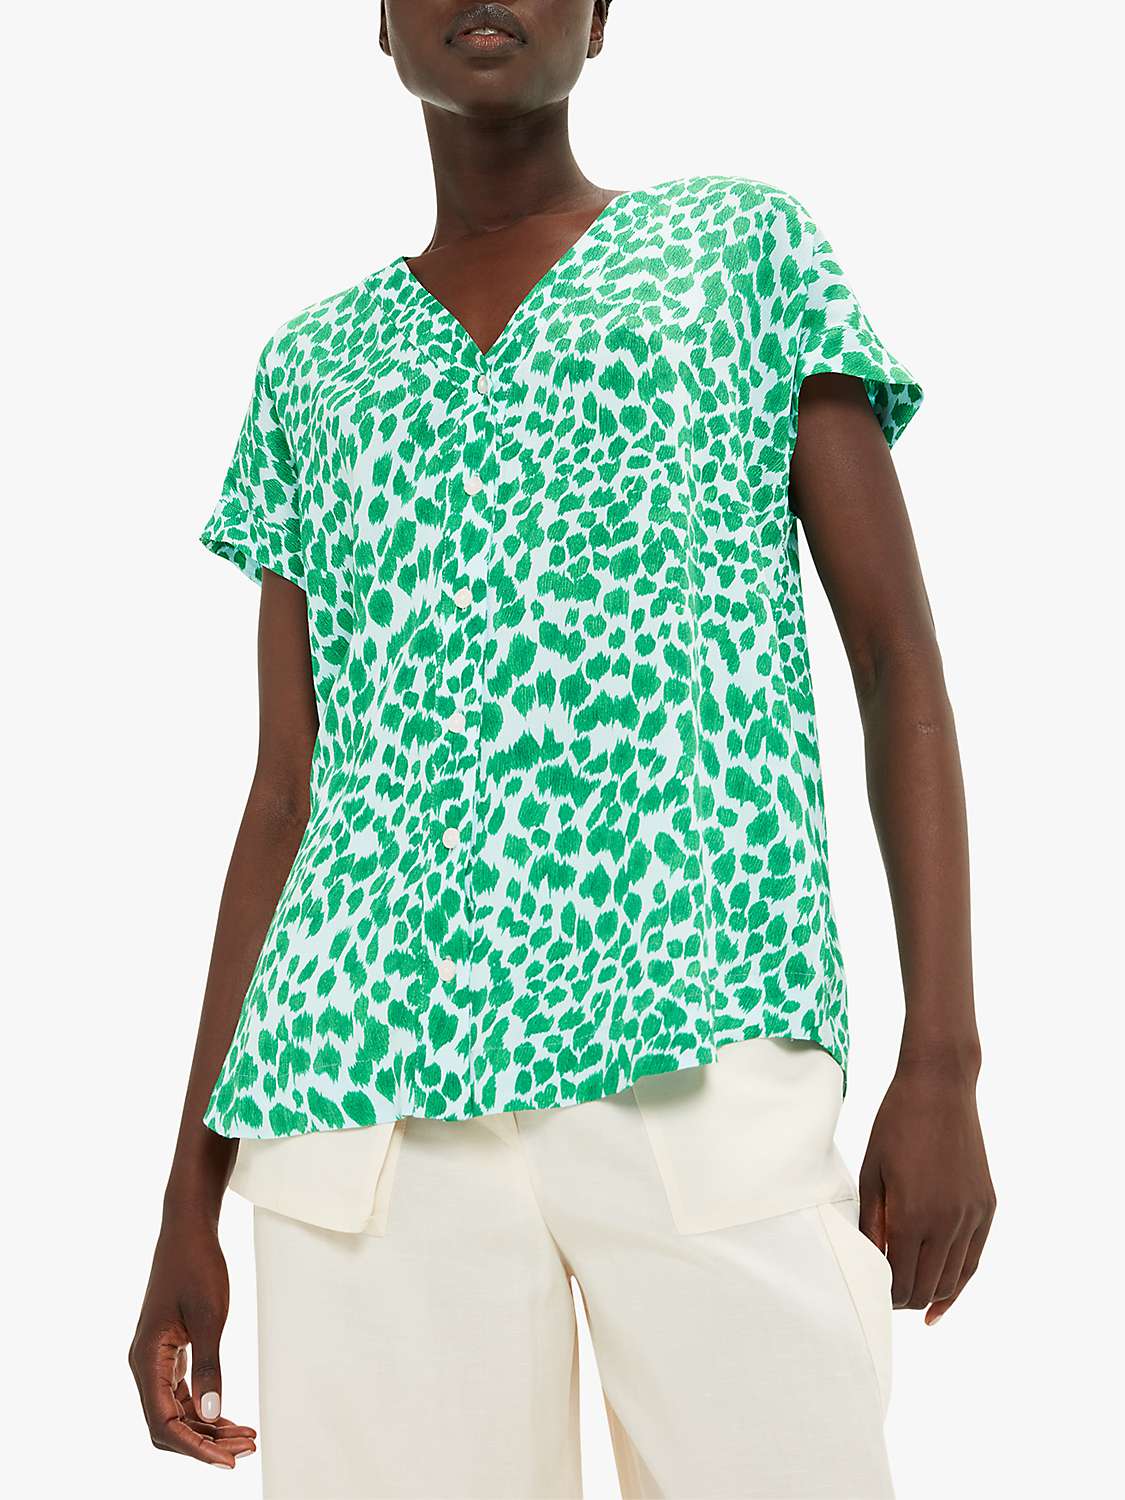 Buy Whistles Smooth Leopard Print Blouse, Green/Multi Online at johnlewis.com